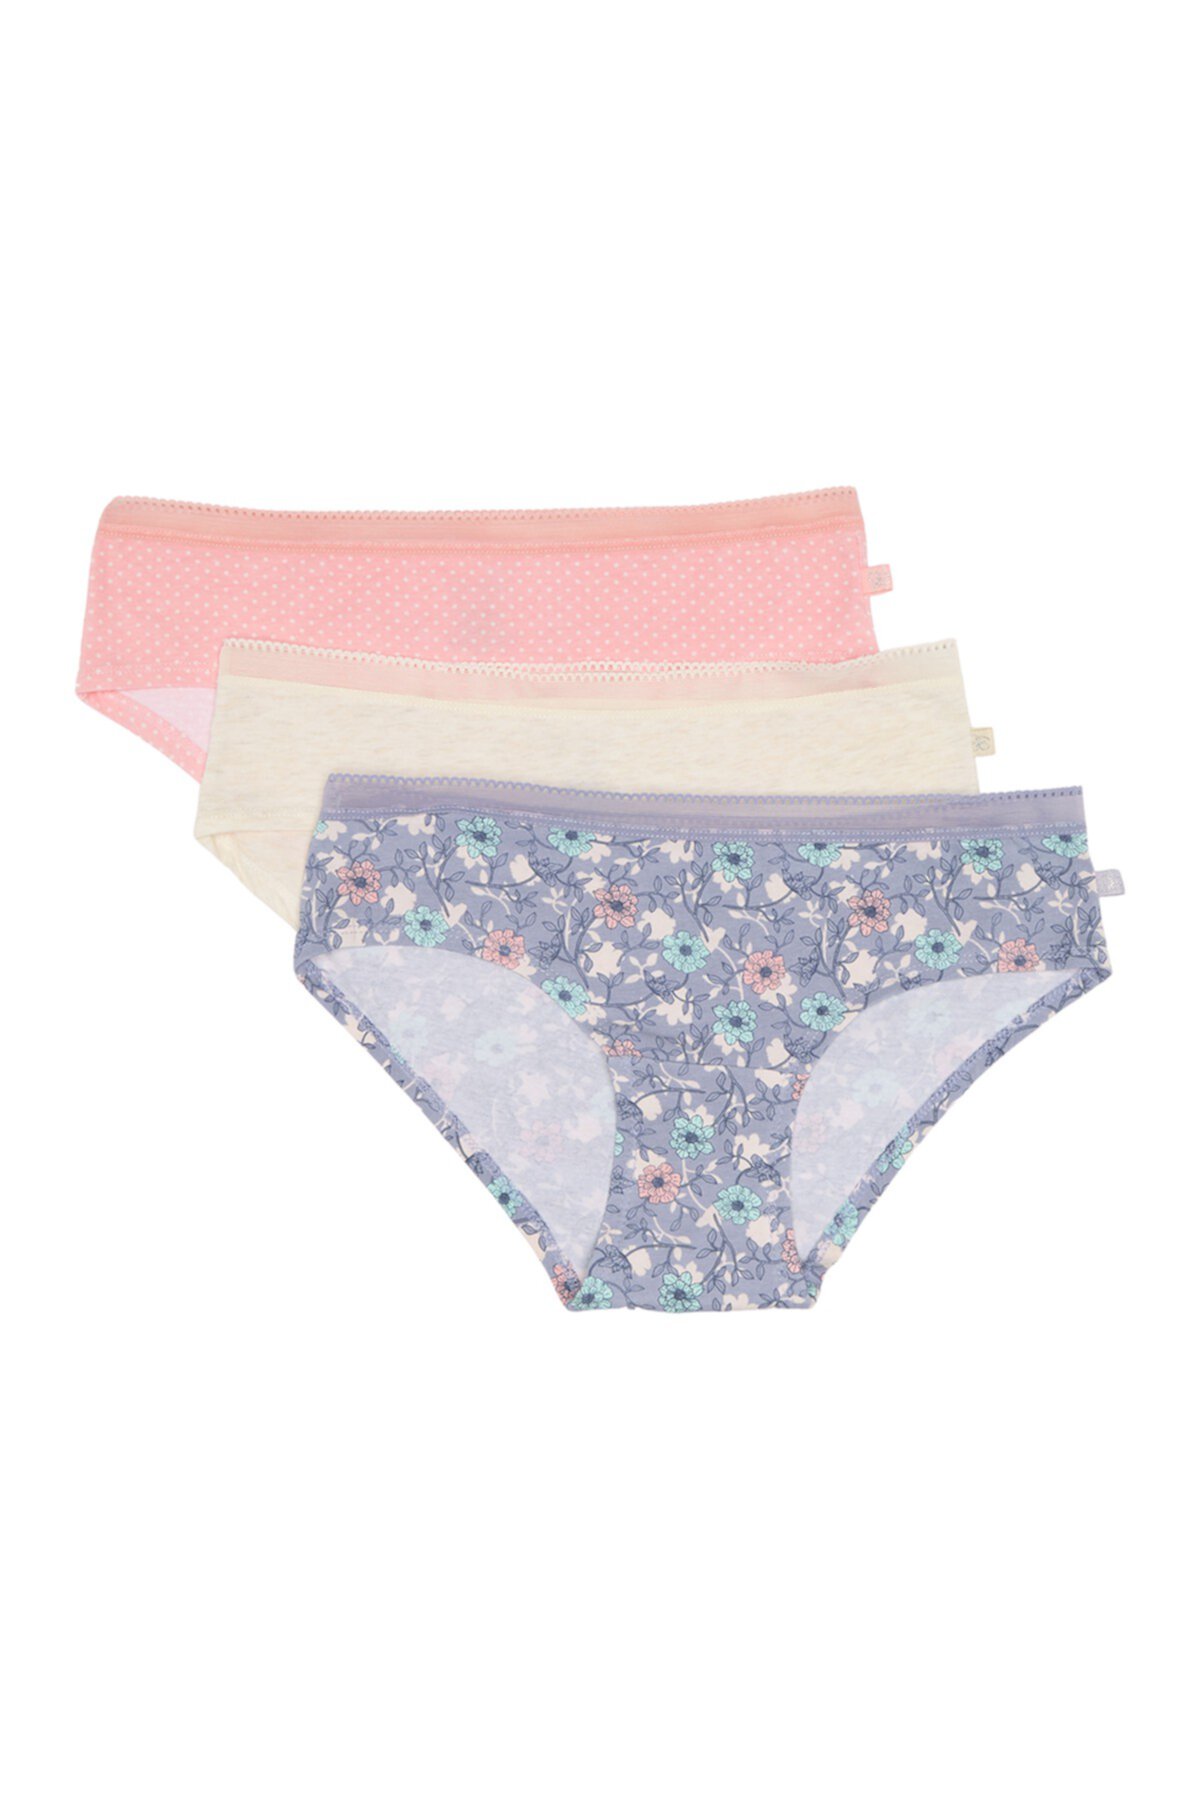 Stretch Cotton Hipster - Pack of 3 Jessica Simpson